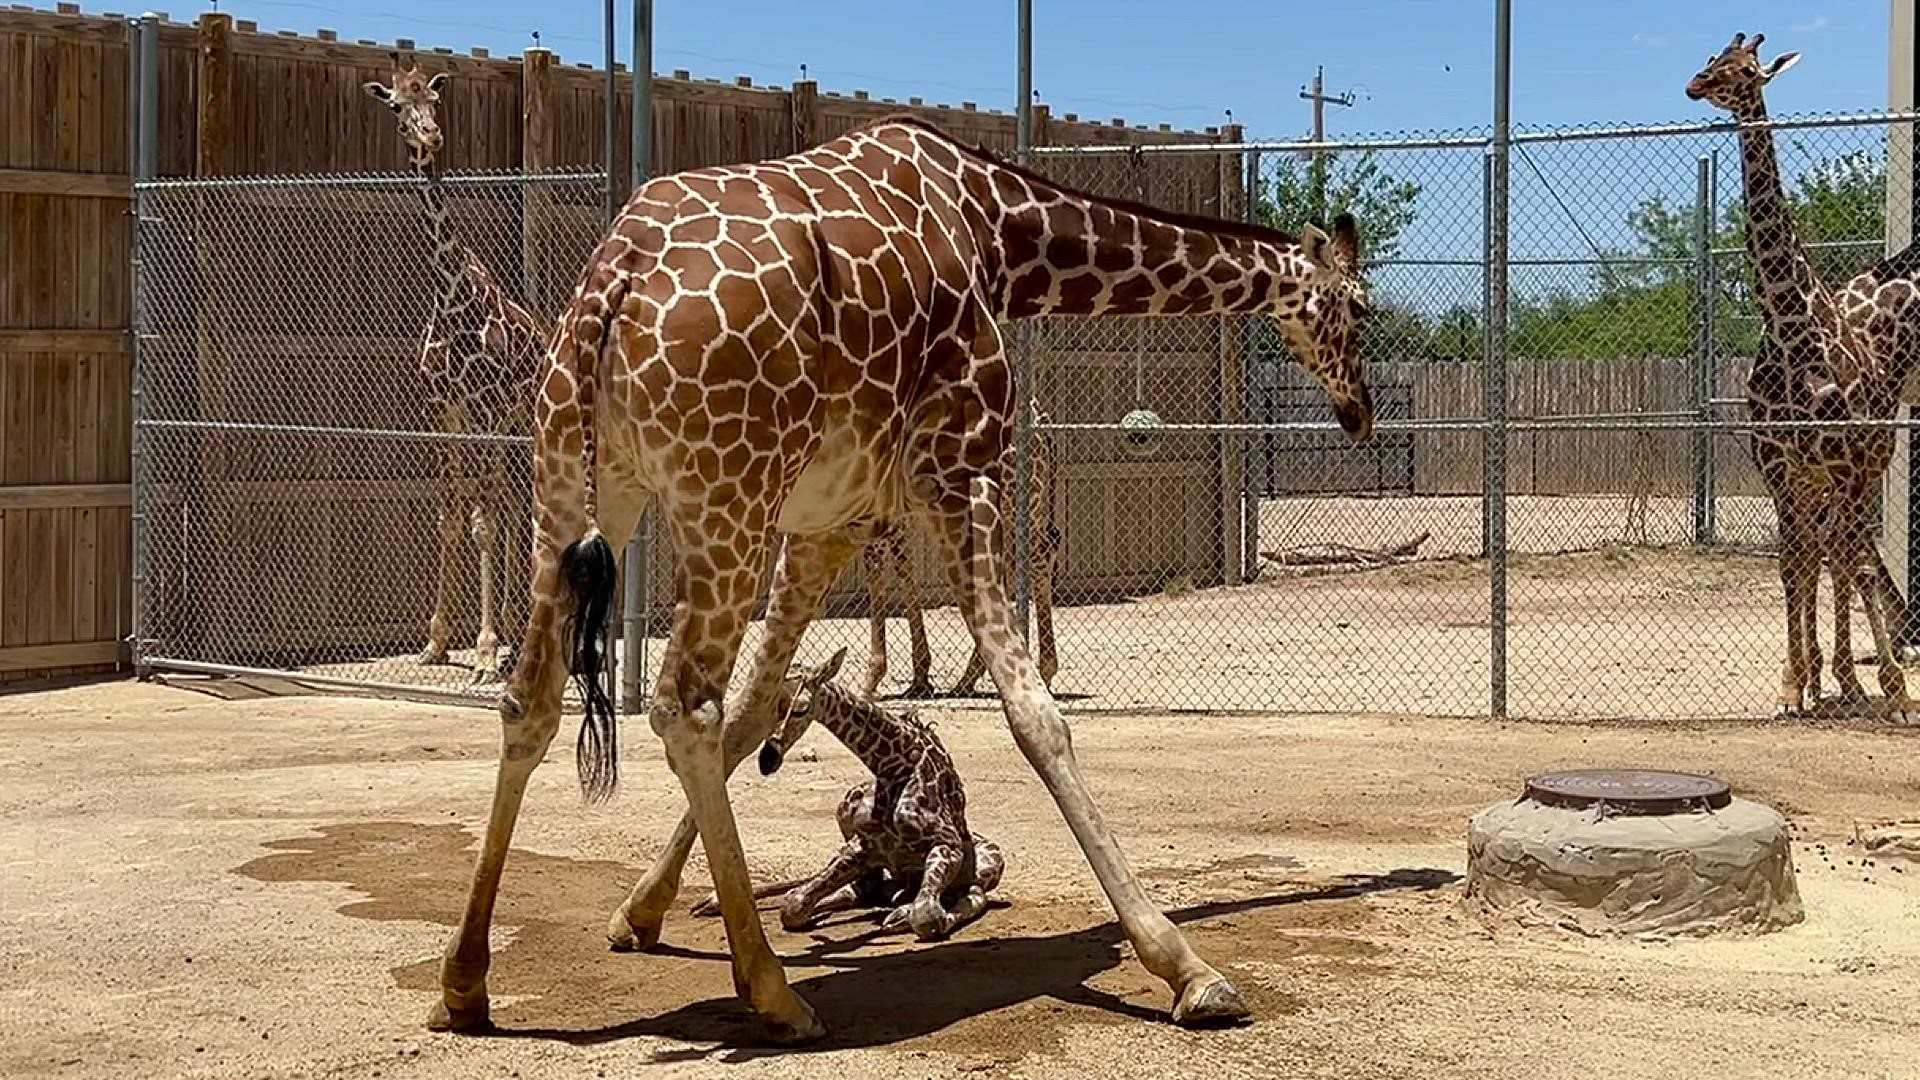 The calf was born Friday afternoon to mom, Jamie, an 11-year-old giraffe.